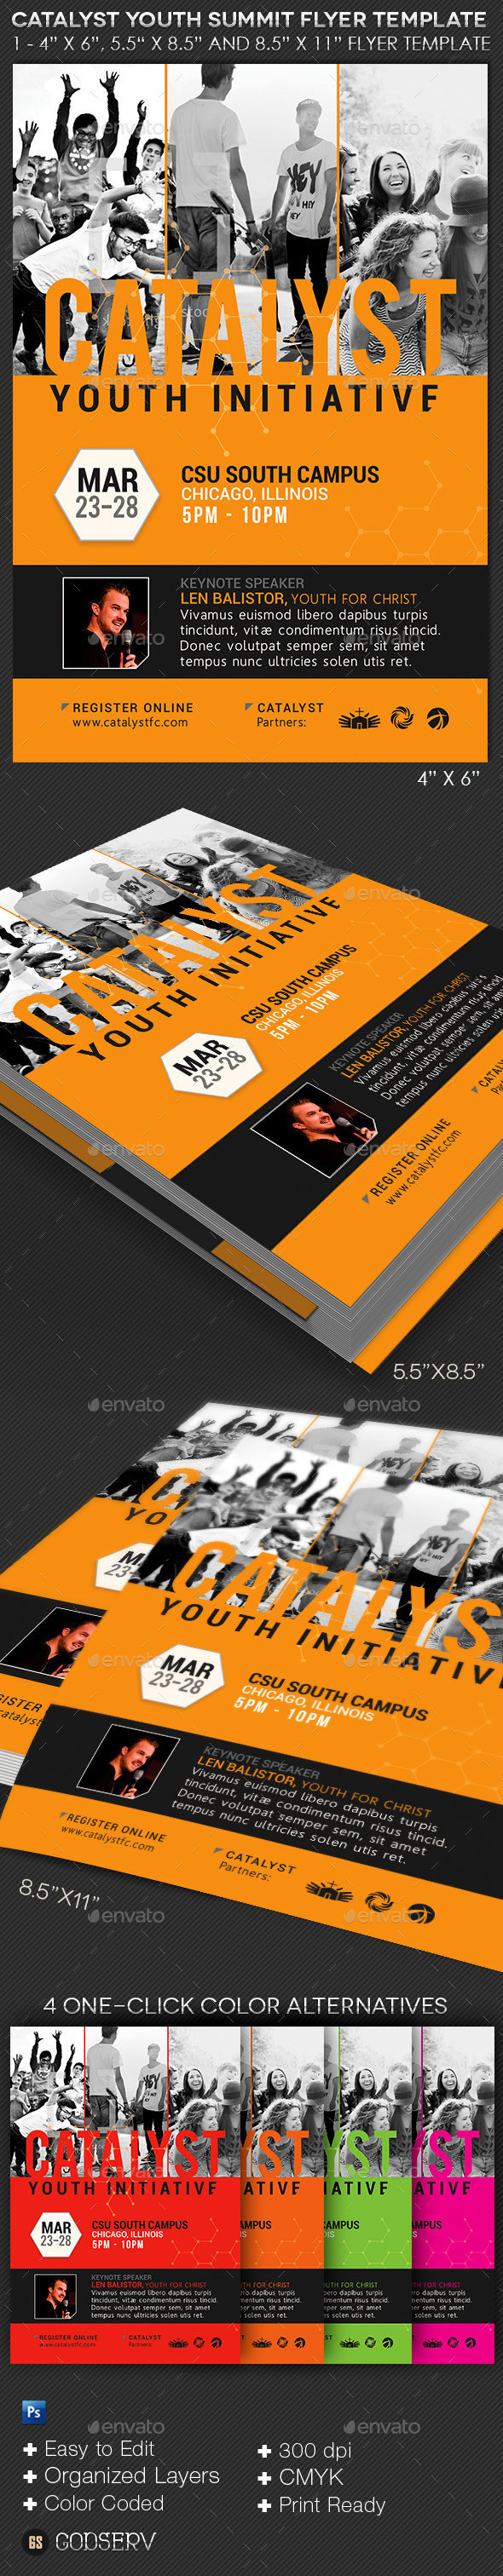 Catalyst youth summit flyer template  preview